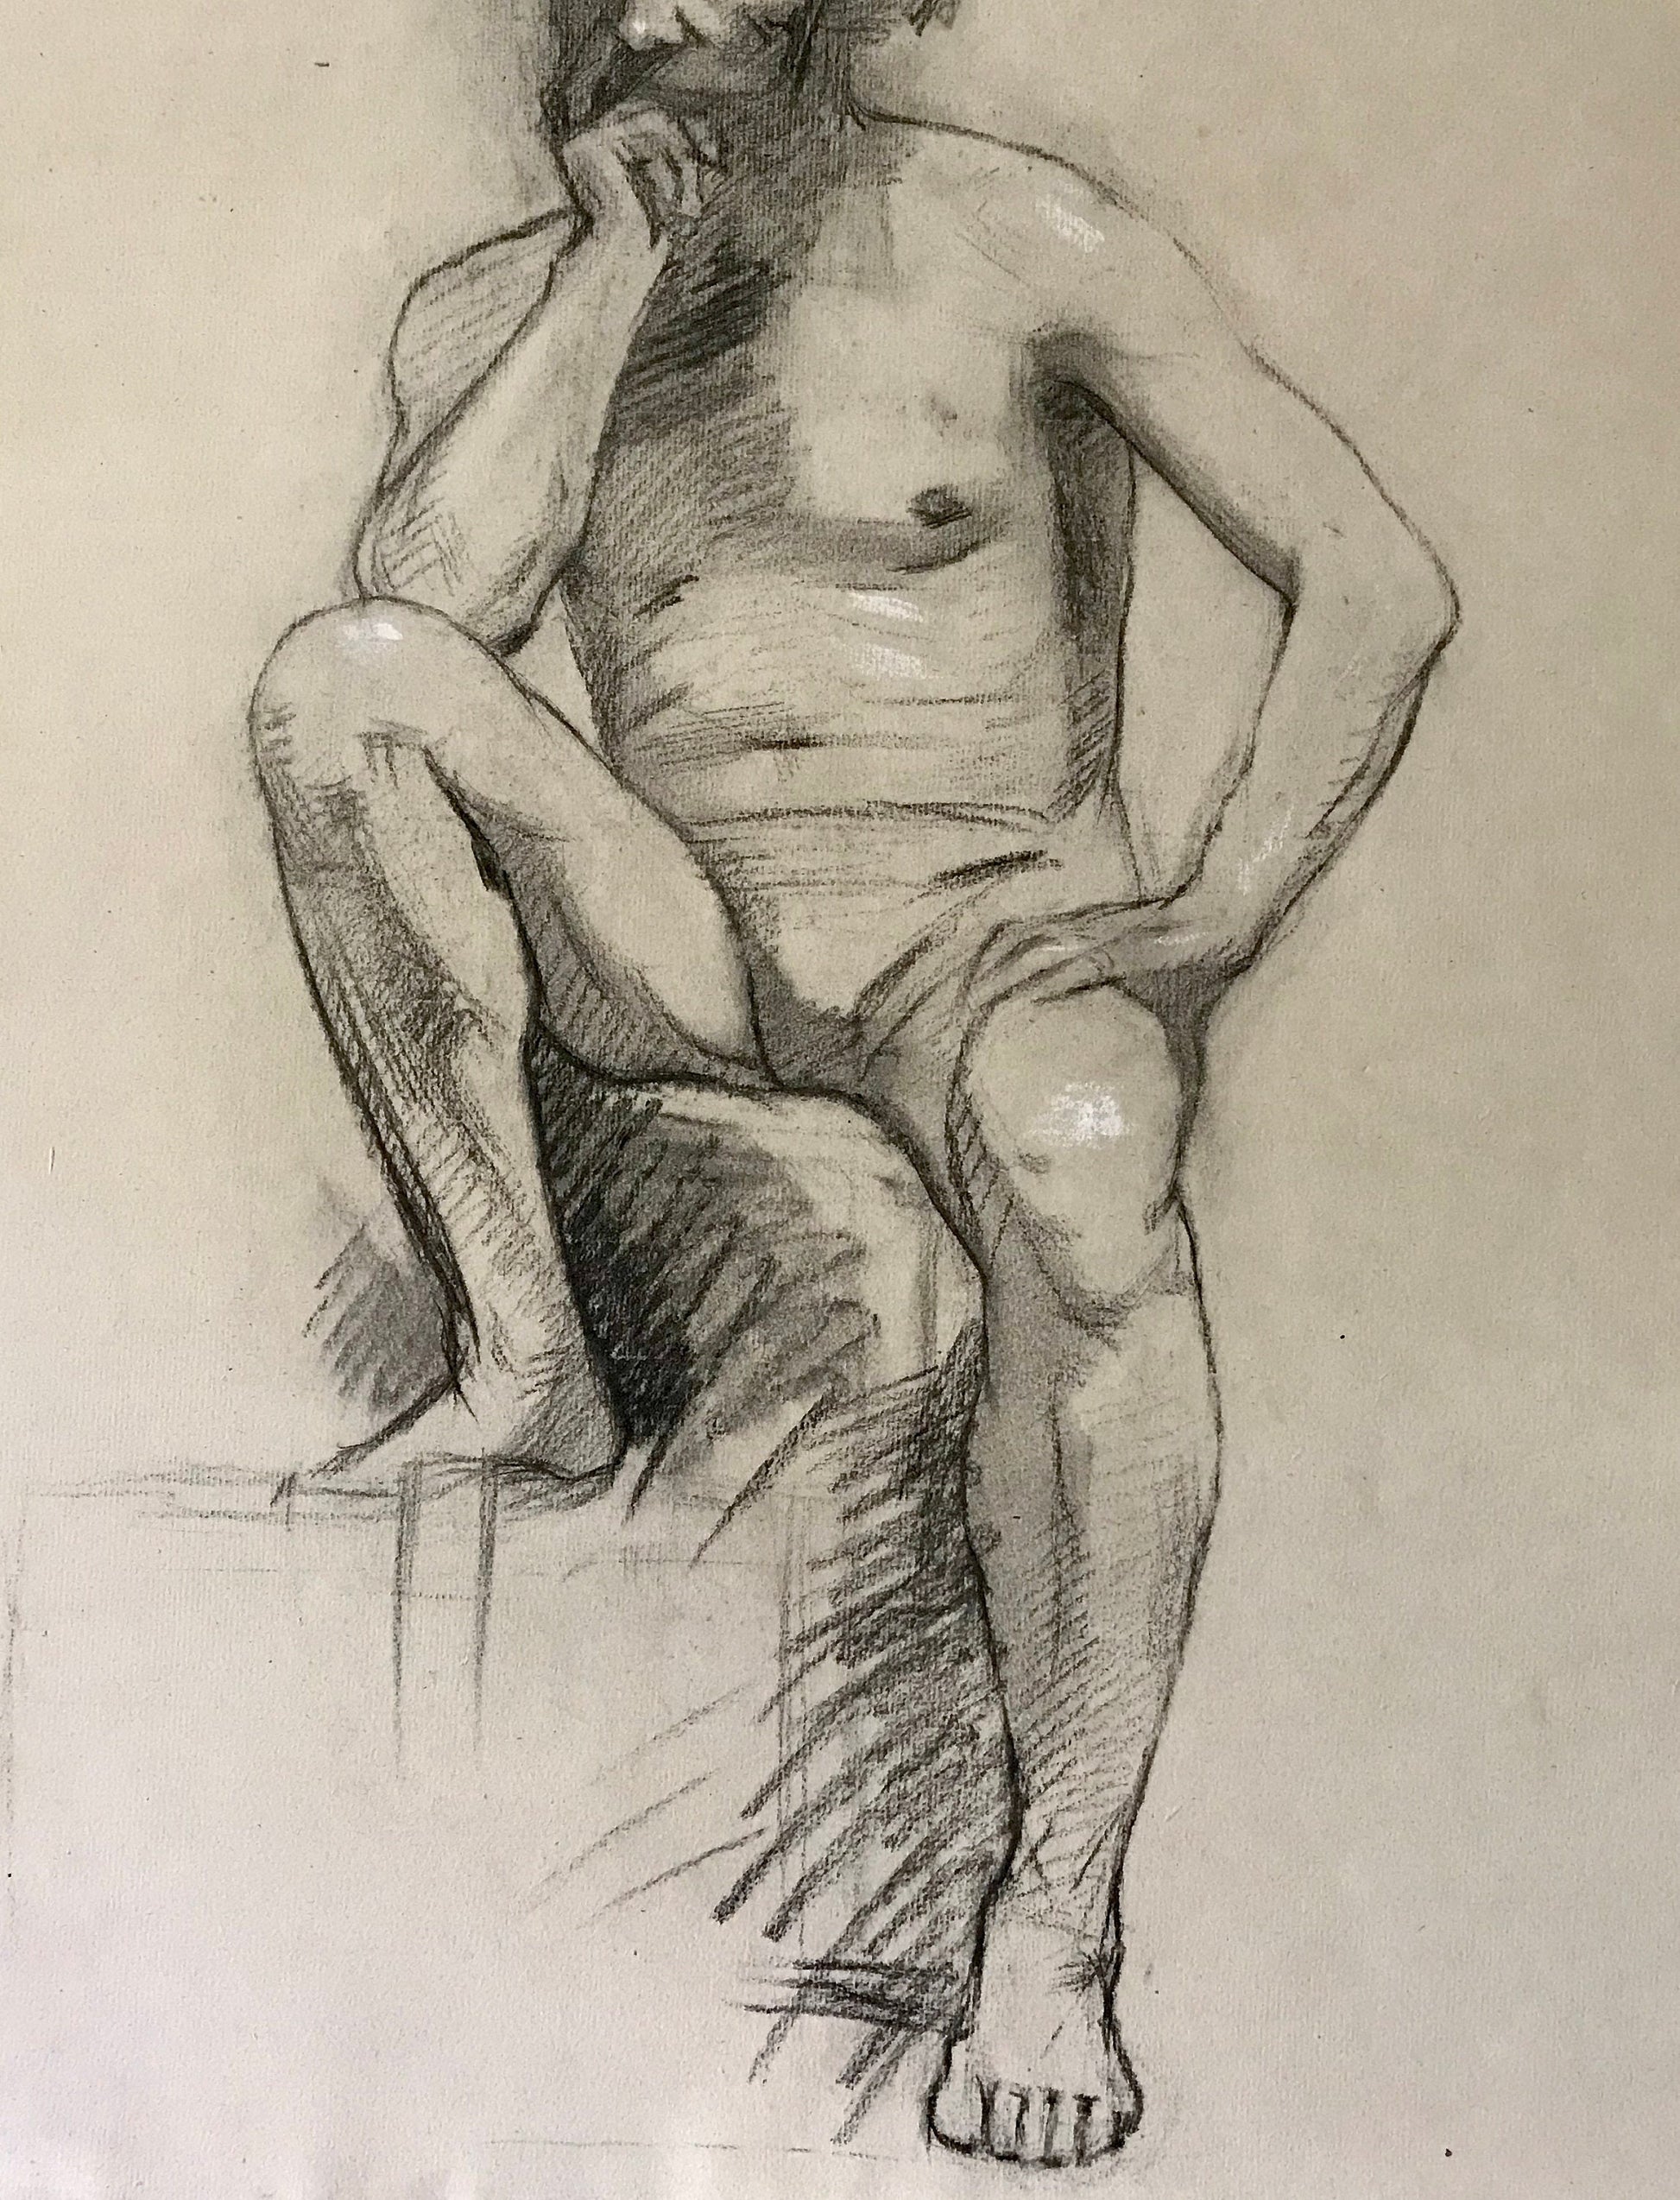 A Original Drawing From Life of a Seated Man. Charcoal With White Highlights. Early 1900’s. Large: 63 x 48 cms.